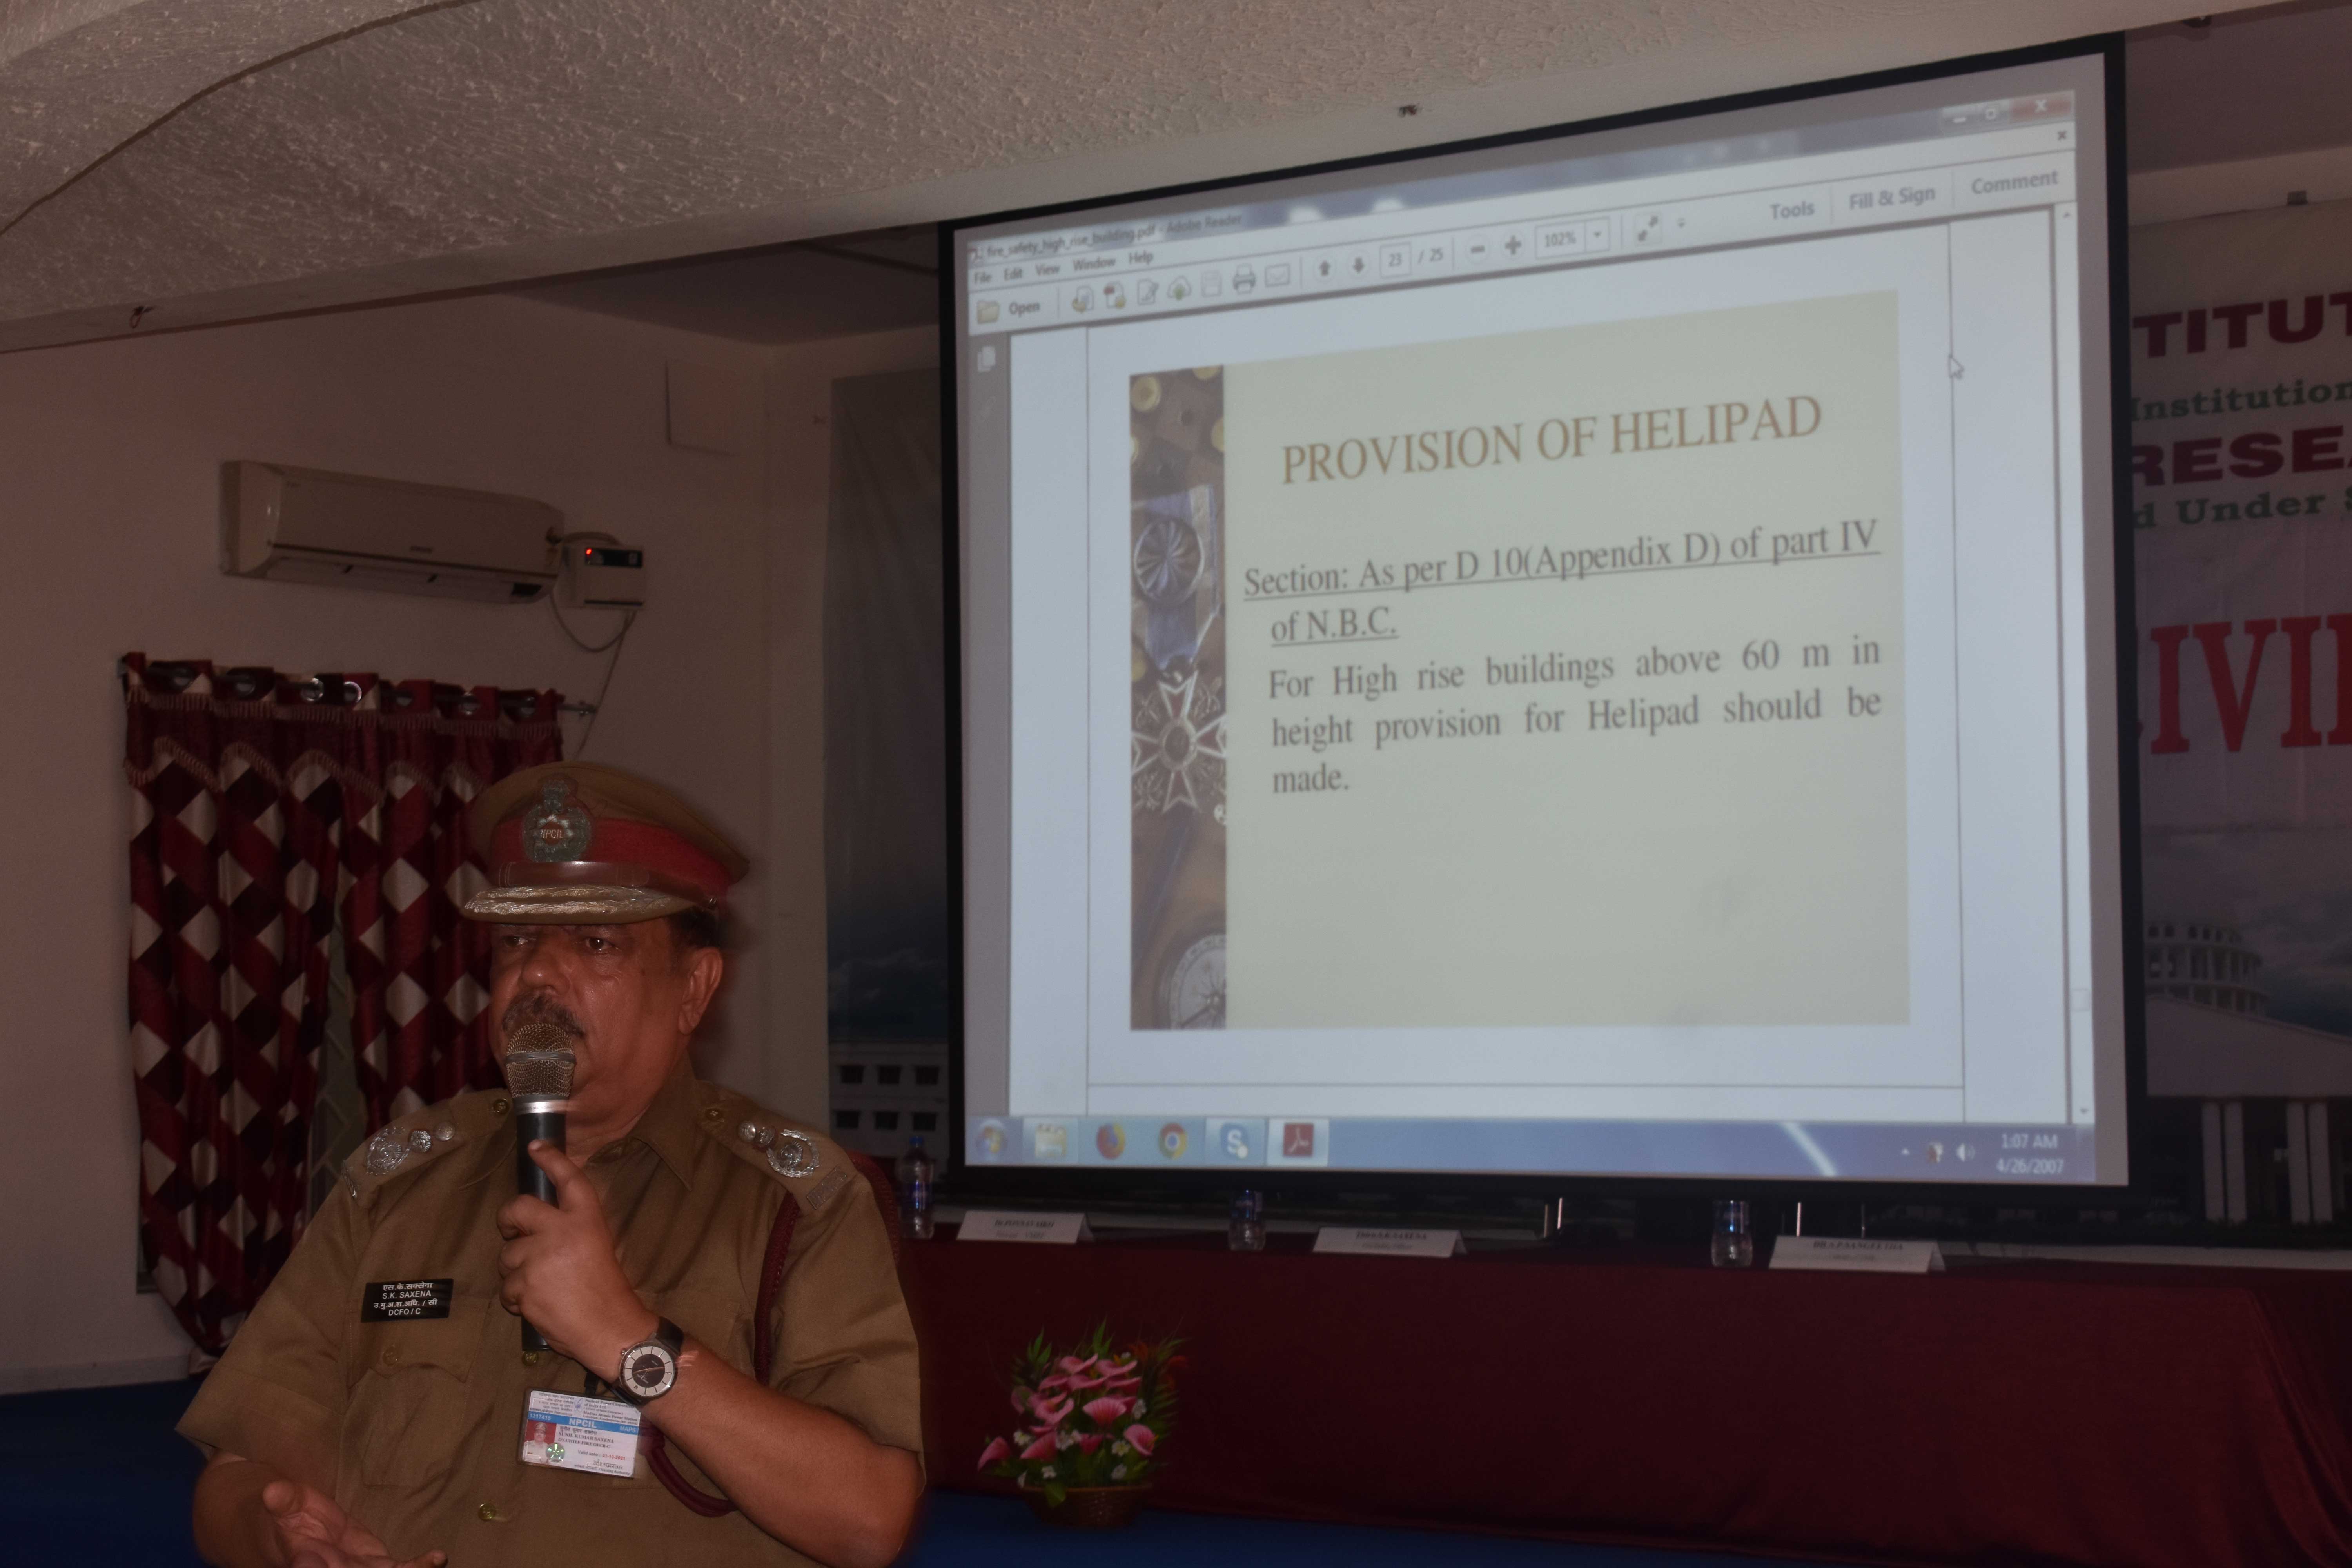 Presentation on the Provision of Helipad by the Firefighter Officer at AVIT
